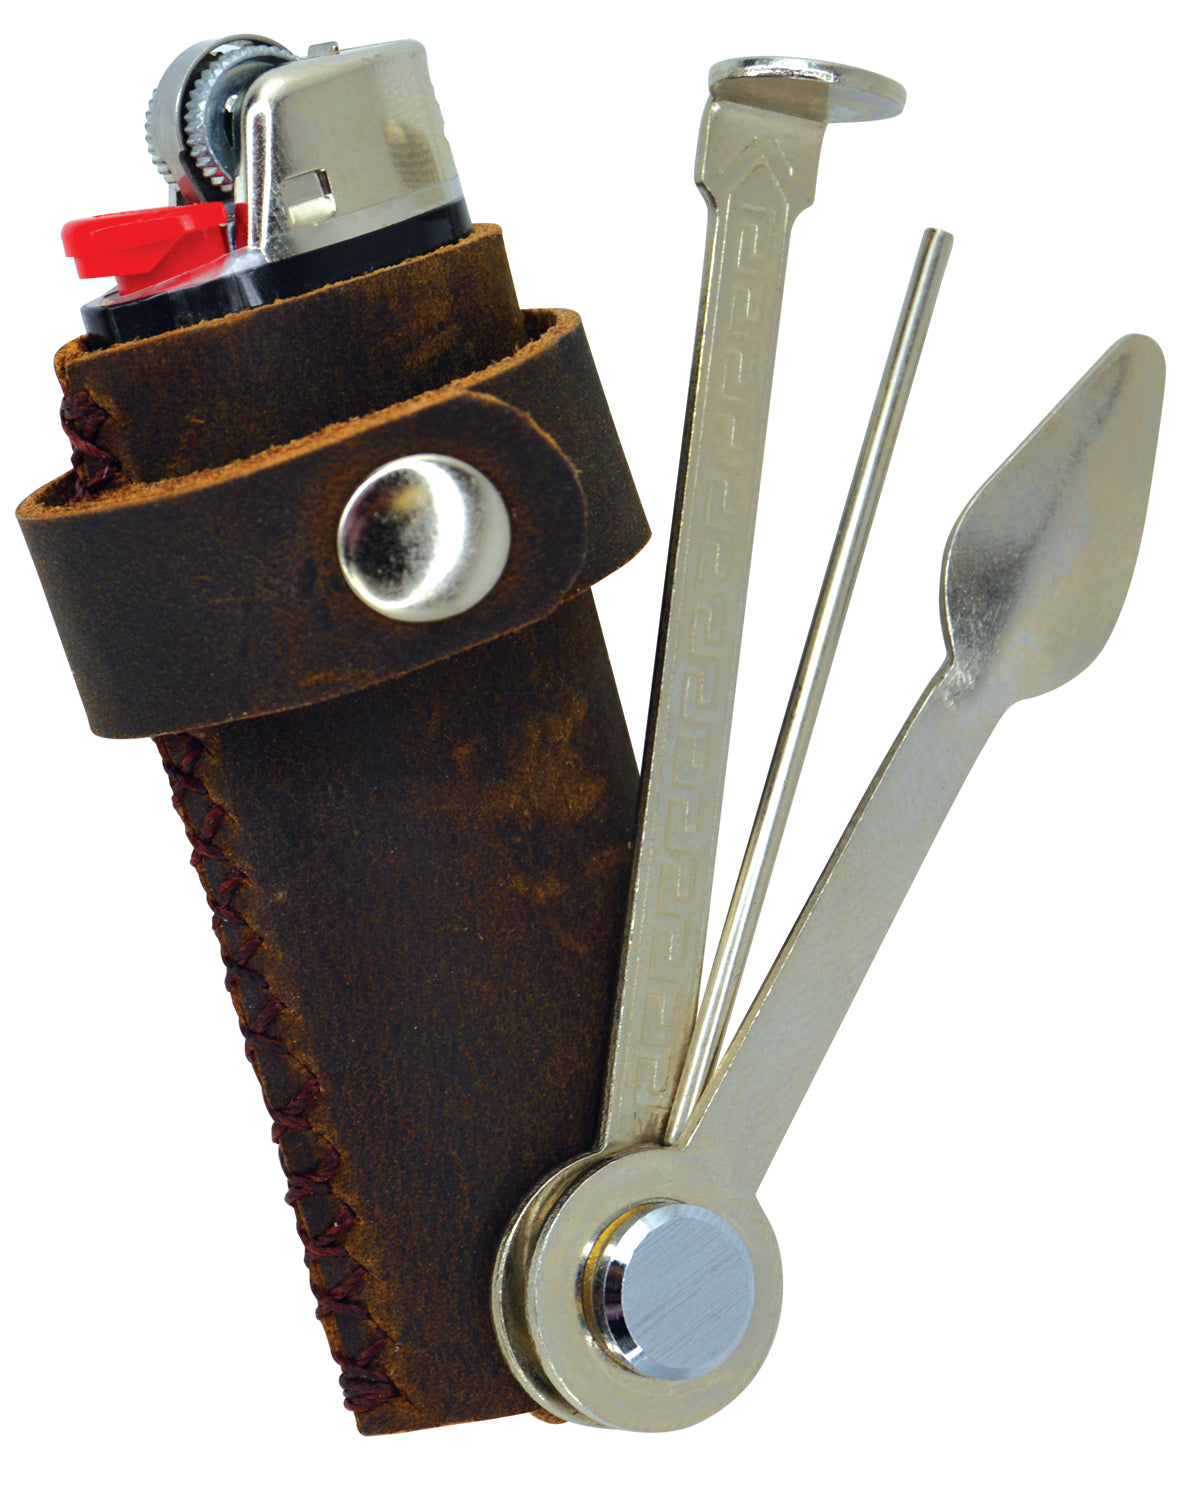 ITEM NUMBER 025592 LEATHER LIGHTER CASEW/TOOLS 6 PIECES PER DISPLAY